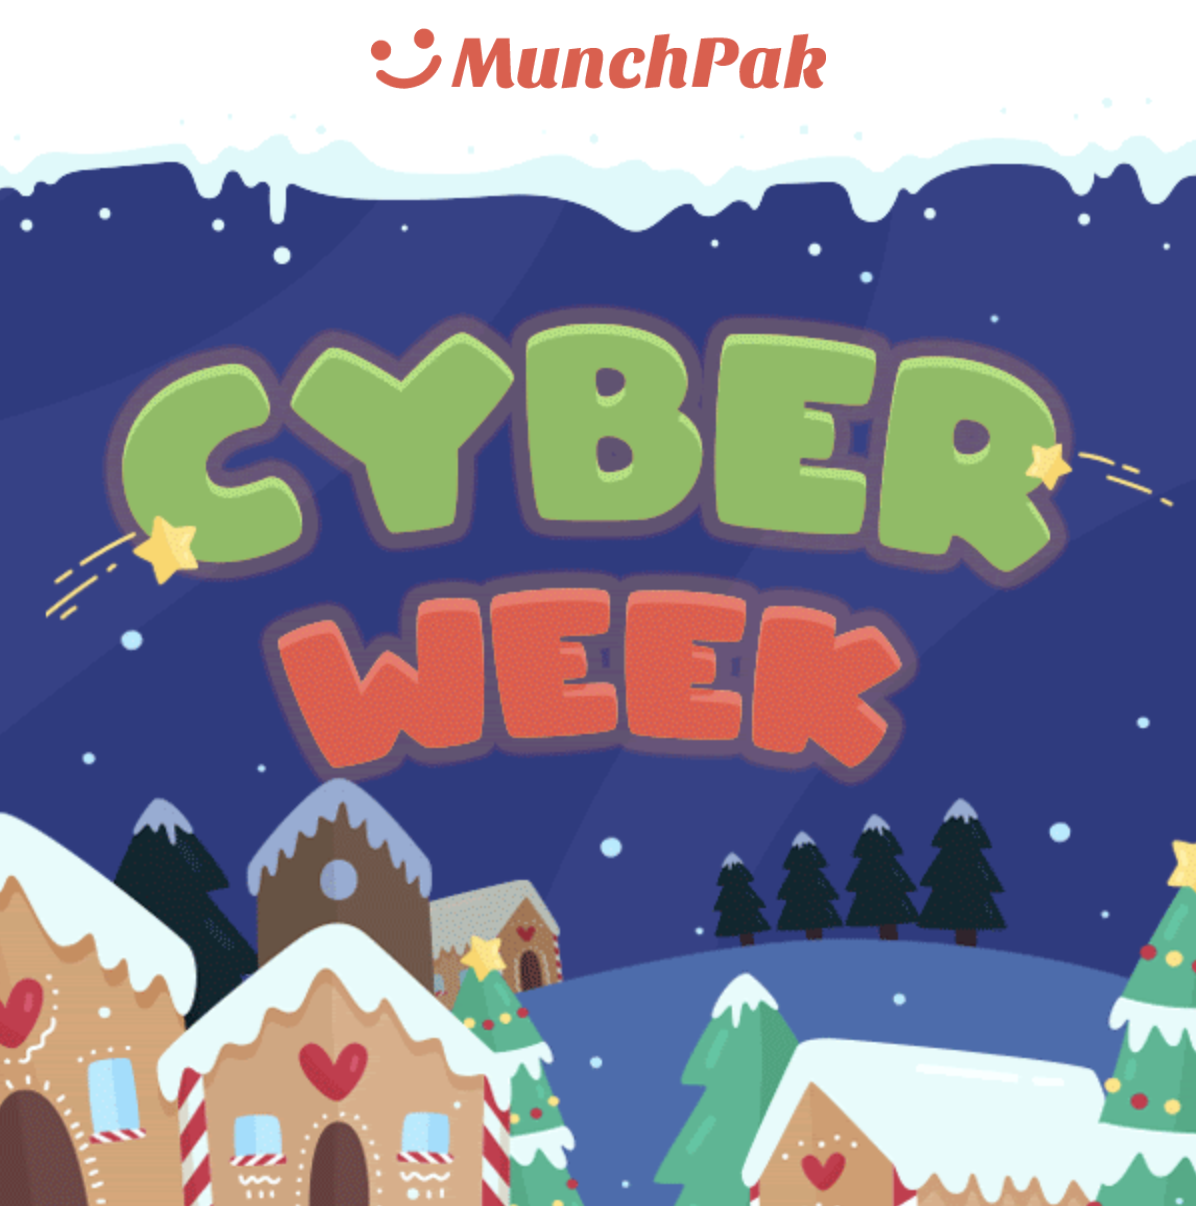 MunchPak Cyber Week Coupons- 50% Off First Box + 10% Off Gift Subscriptions!